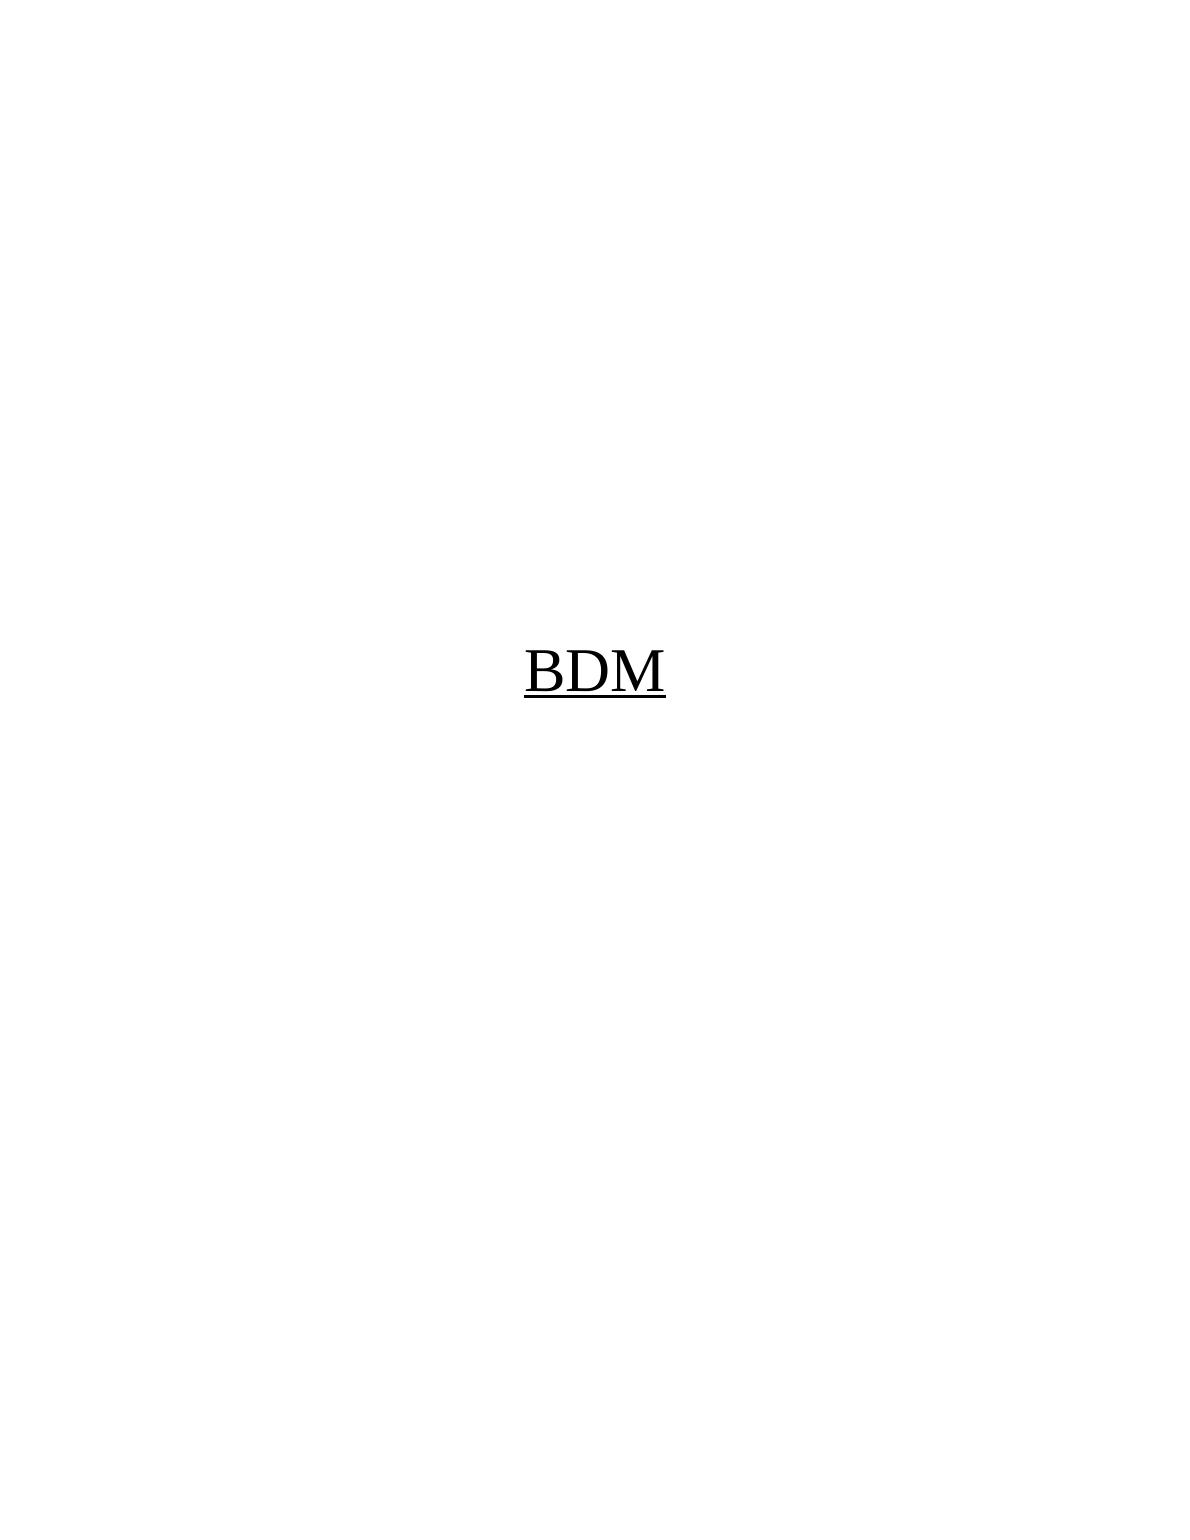 Business Decision Making BDM: Assignment_1